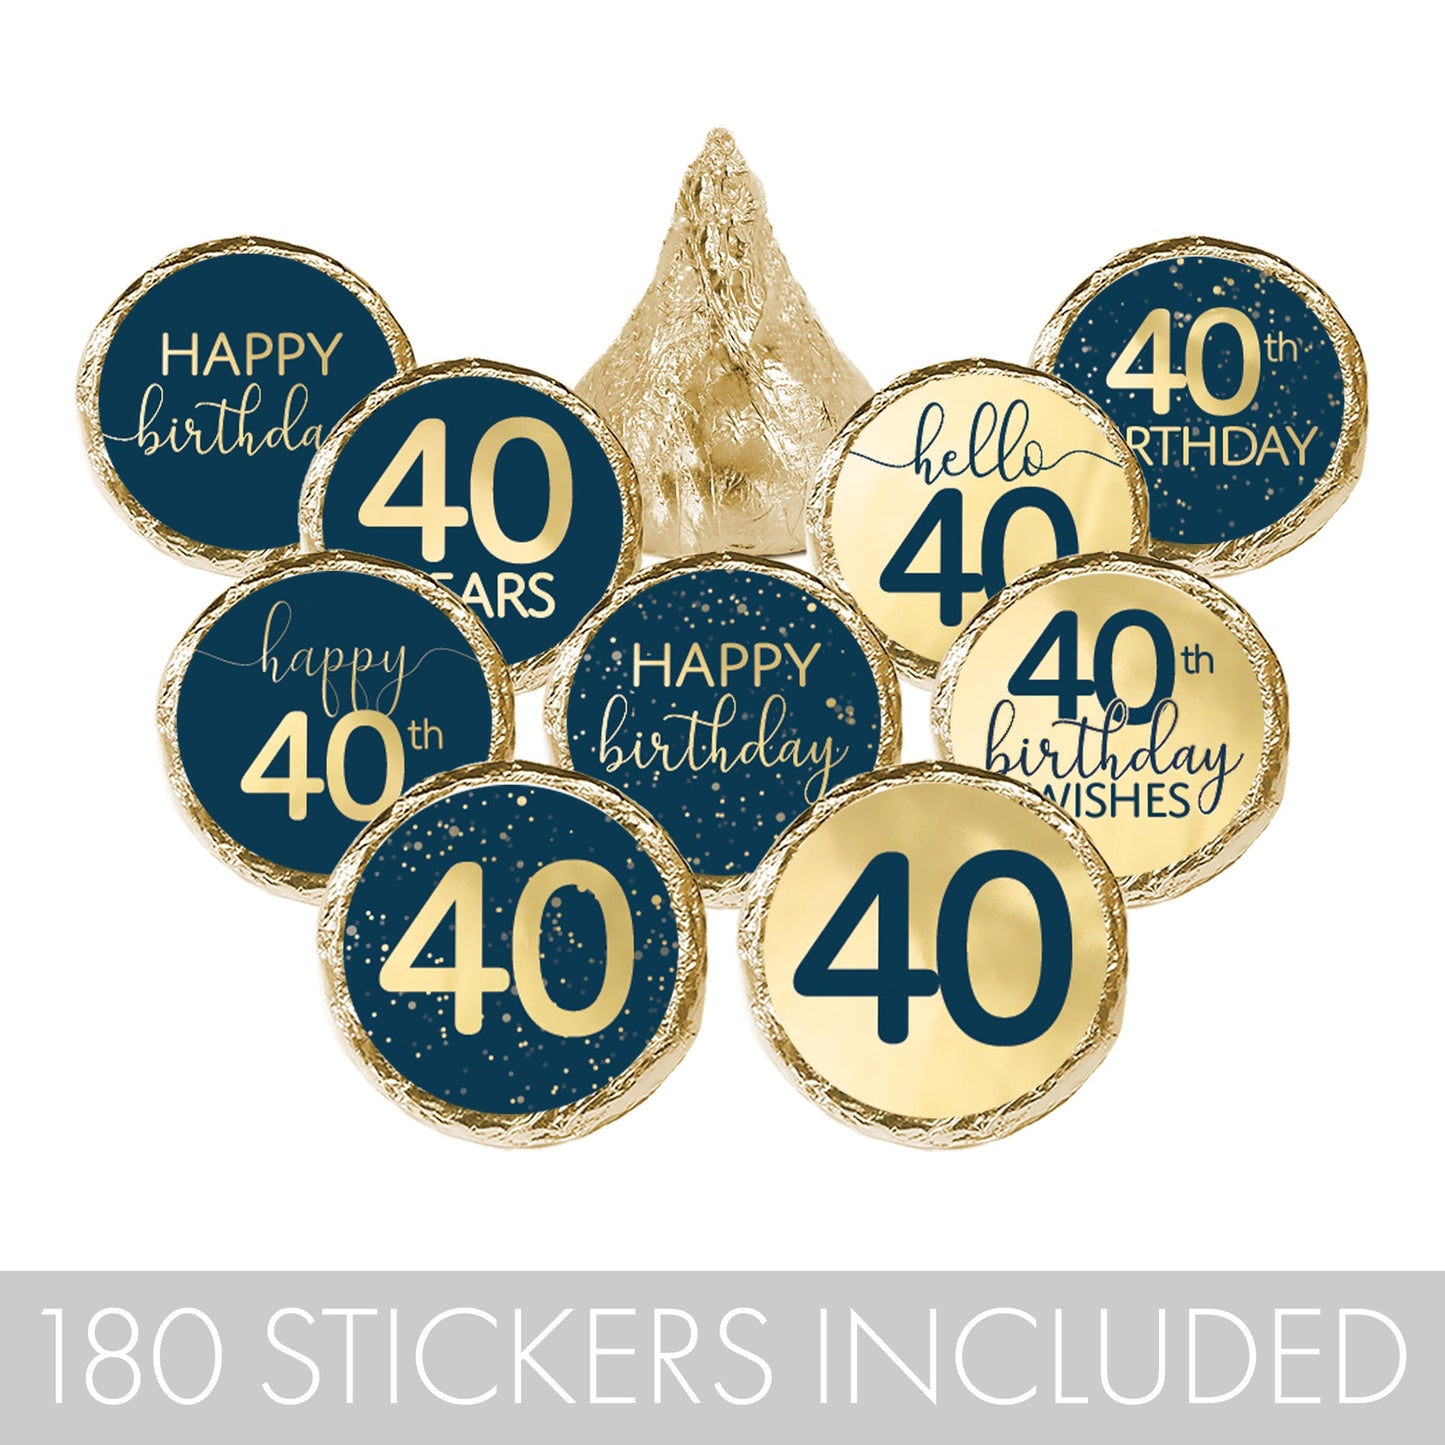 happy 40th Hersheys Kisses stickers with a navy blue and gold foil design